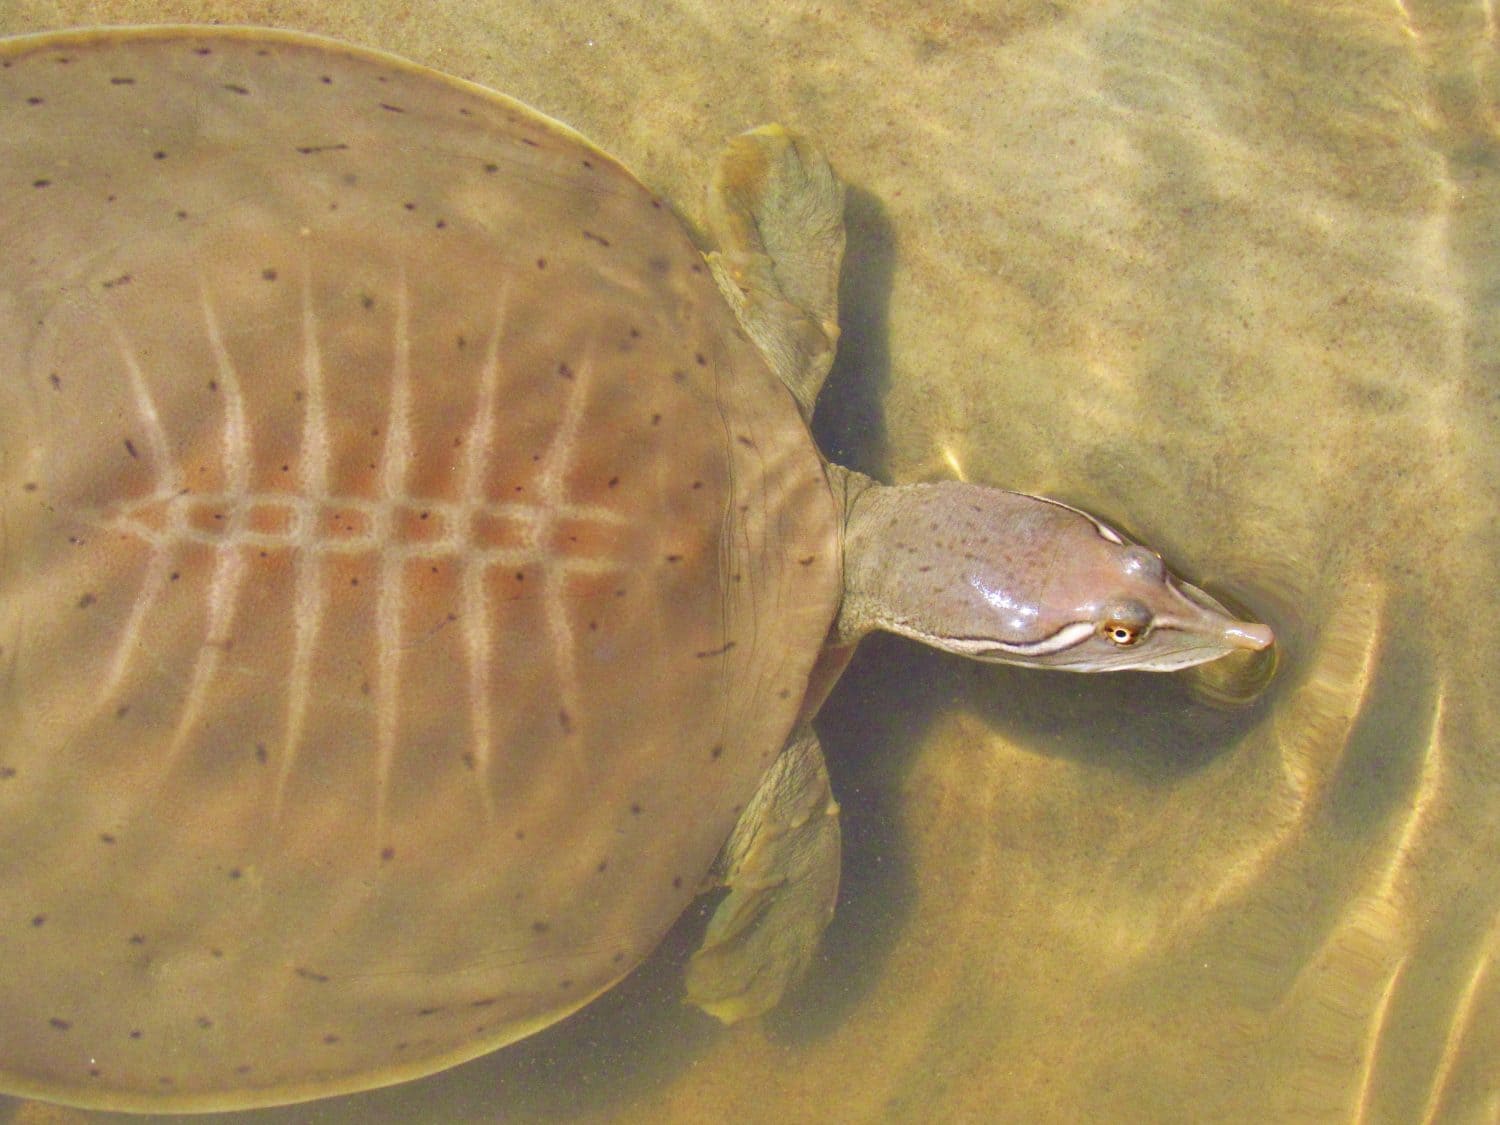 Male Smooth Softshell turtle (Apalone mutica) swimming under water close-up, Mississippi